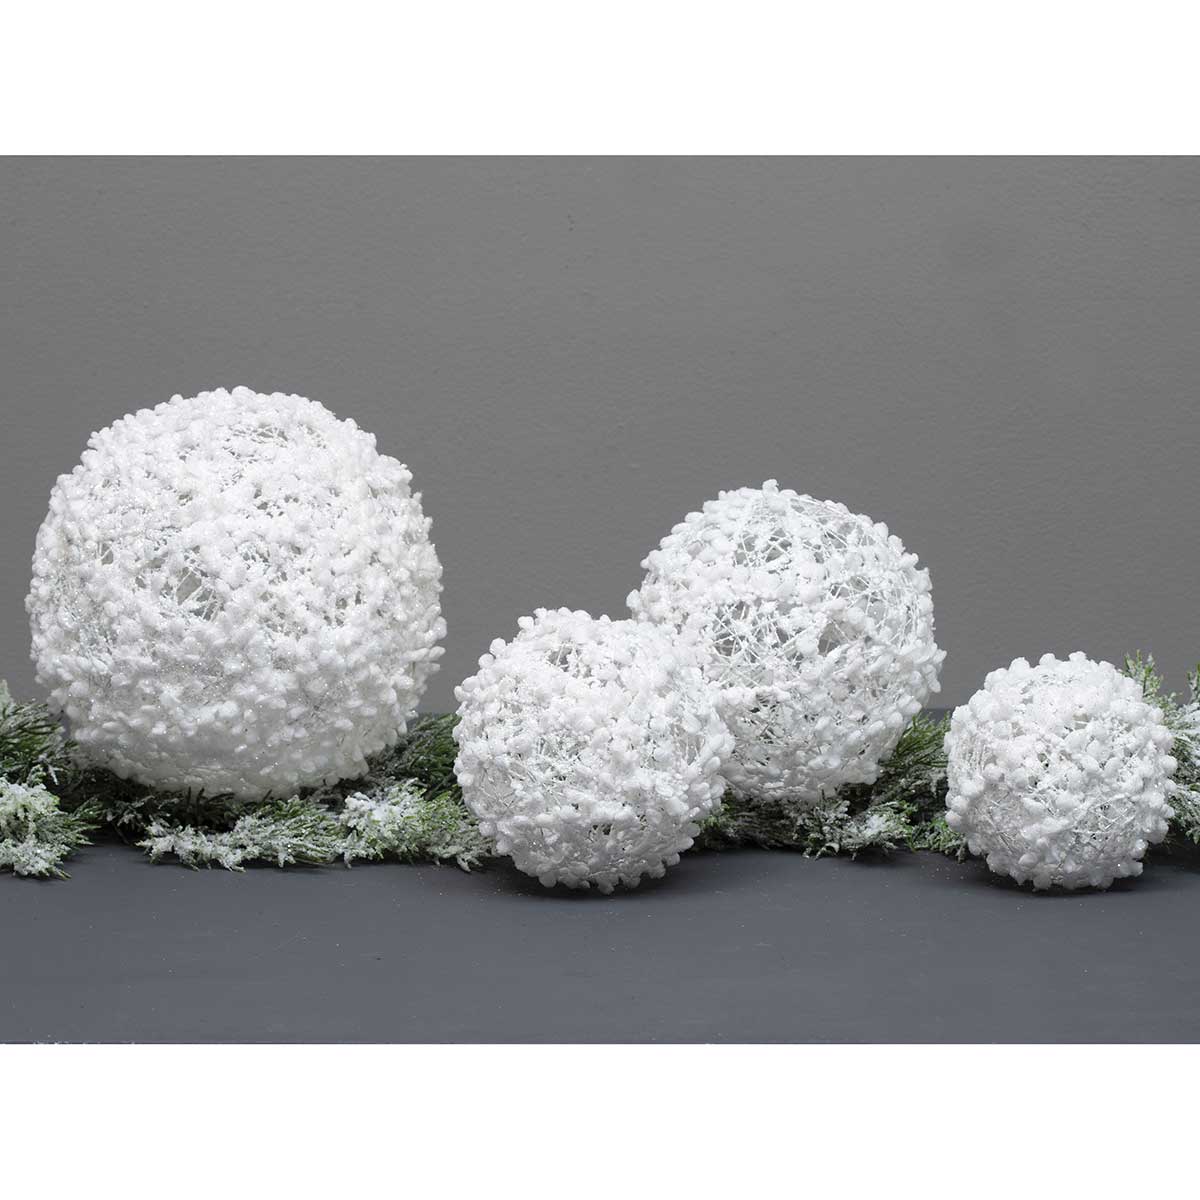 BALL PUFF BALL ORNAMENT LARGE 6IN WHITE GLITTER/MICA - Click Image to Close